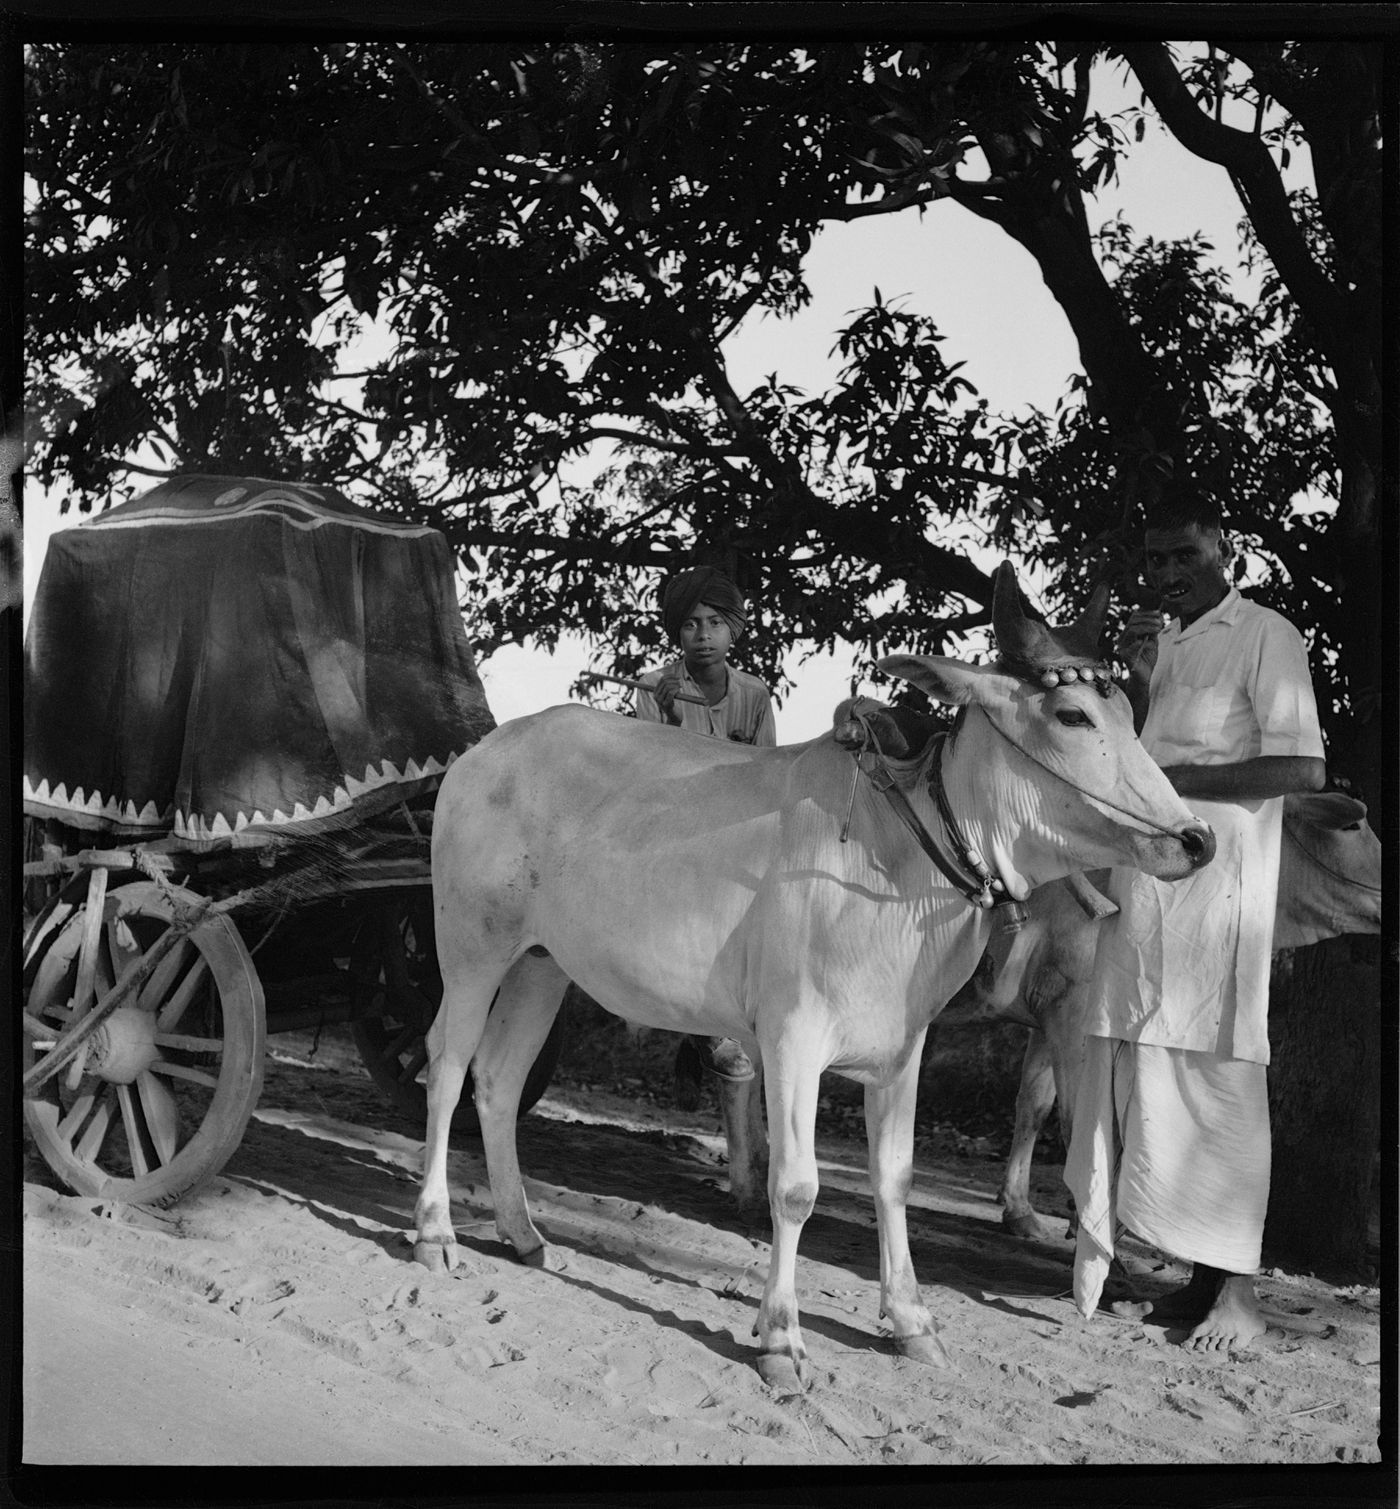 Men with cow-drawn cart in Chandigarh's area before the construction, India